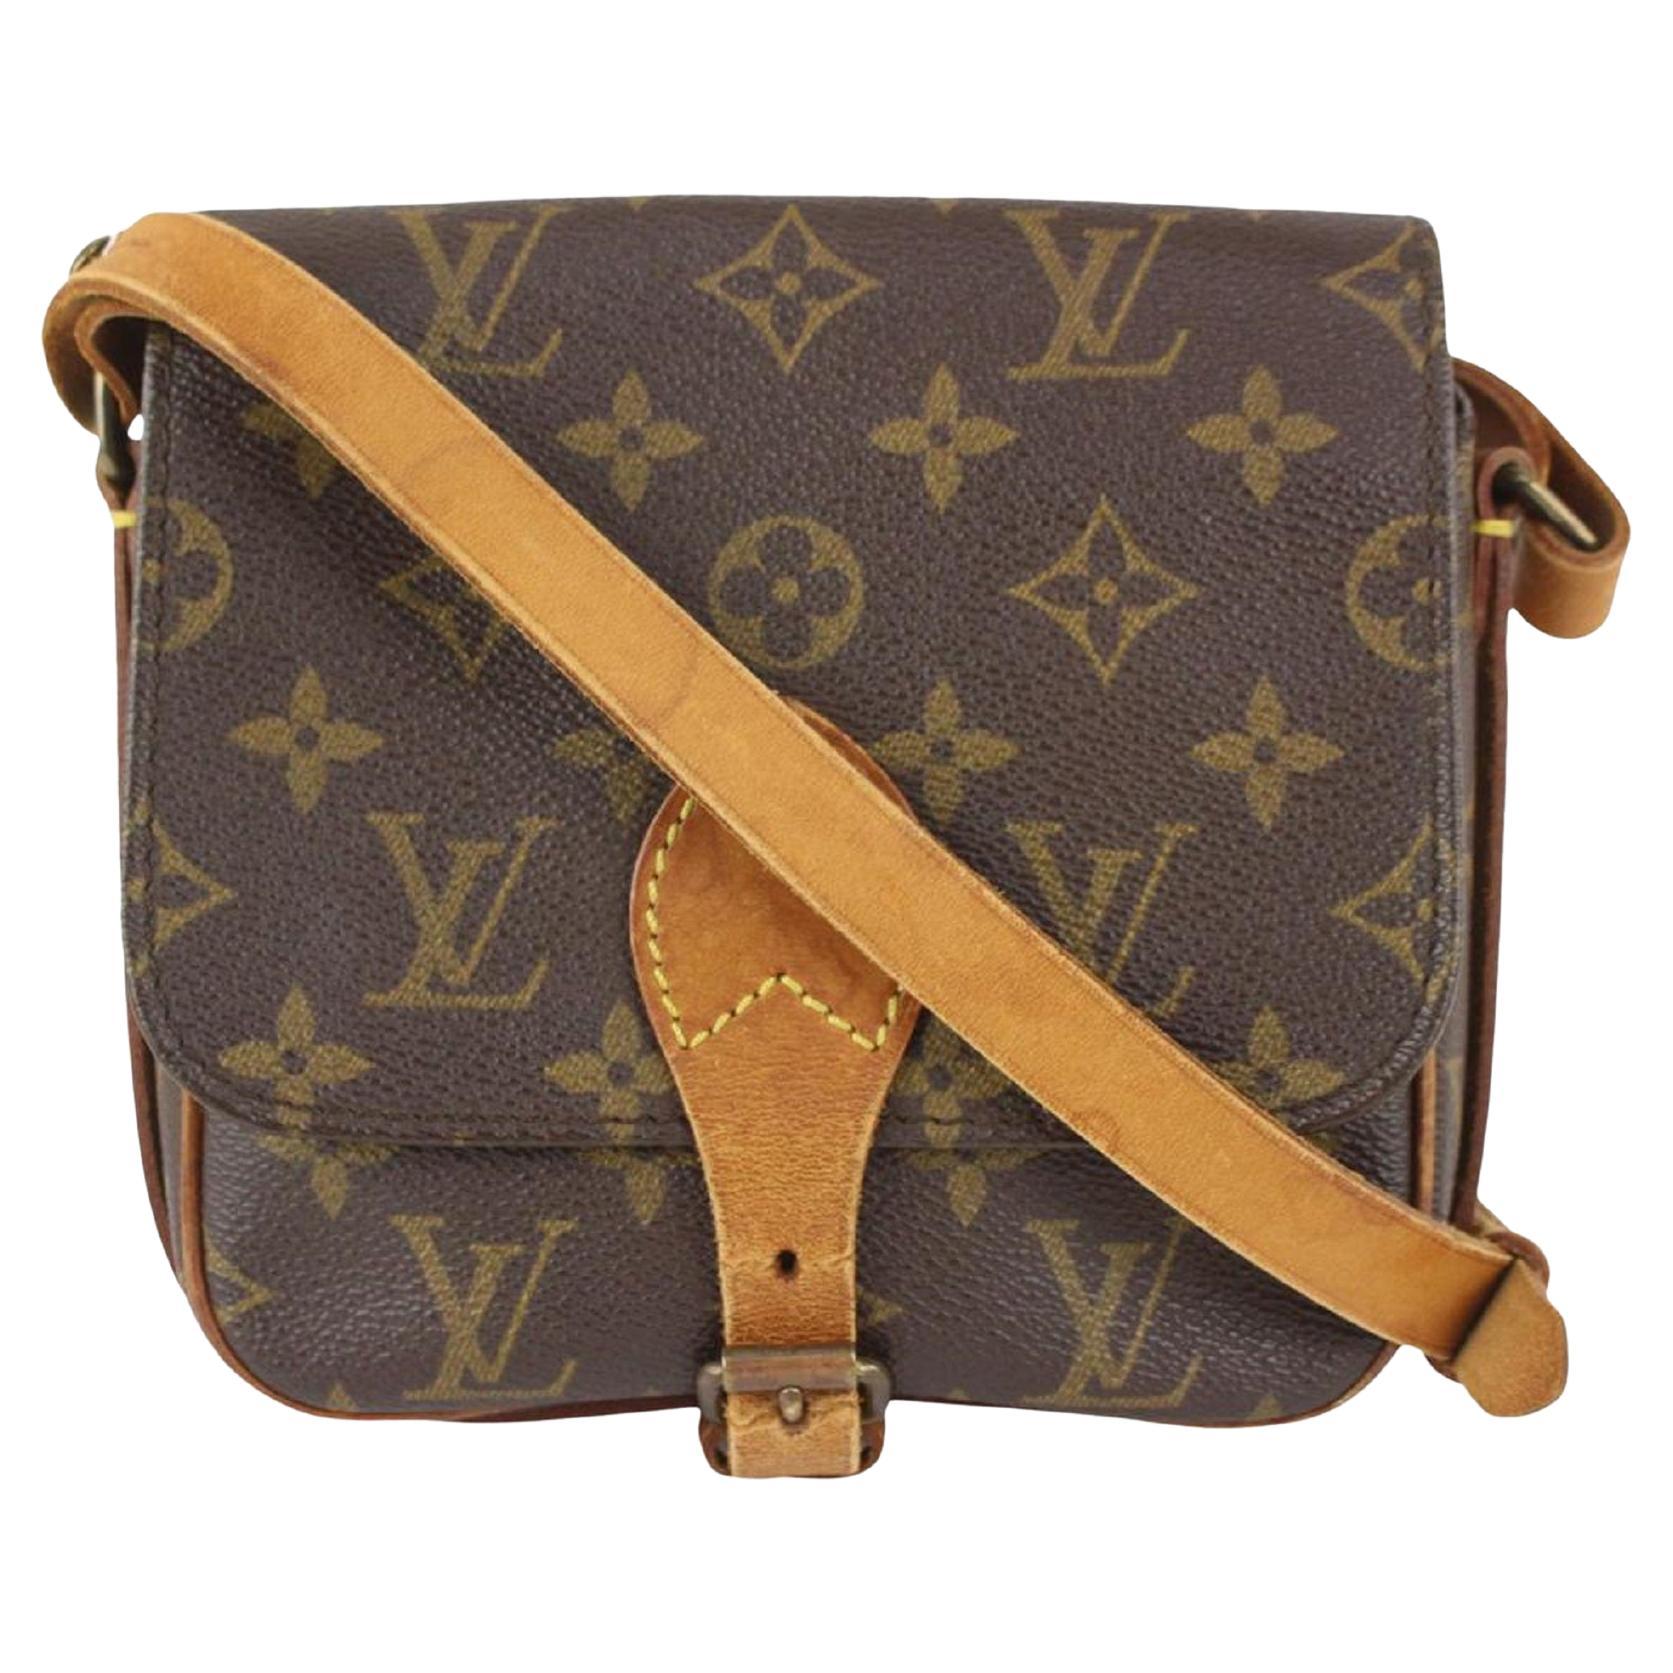 Louis Vuitton Carryall Bags - 17 For Sale on 1stDibs  louis vuitton carry  all tote, carryall bag louis vuitton, carry all louis vuitton